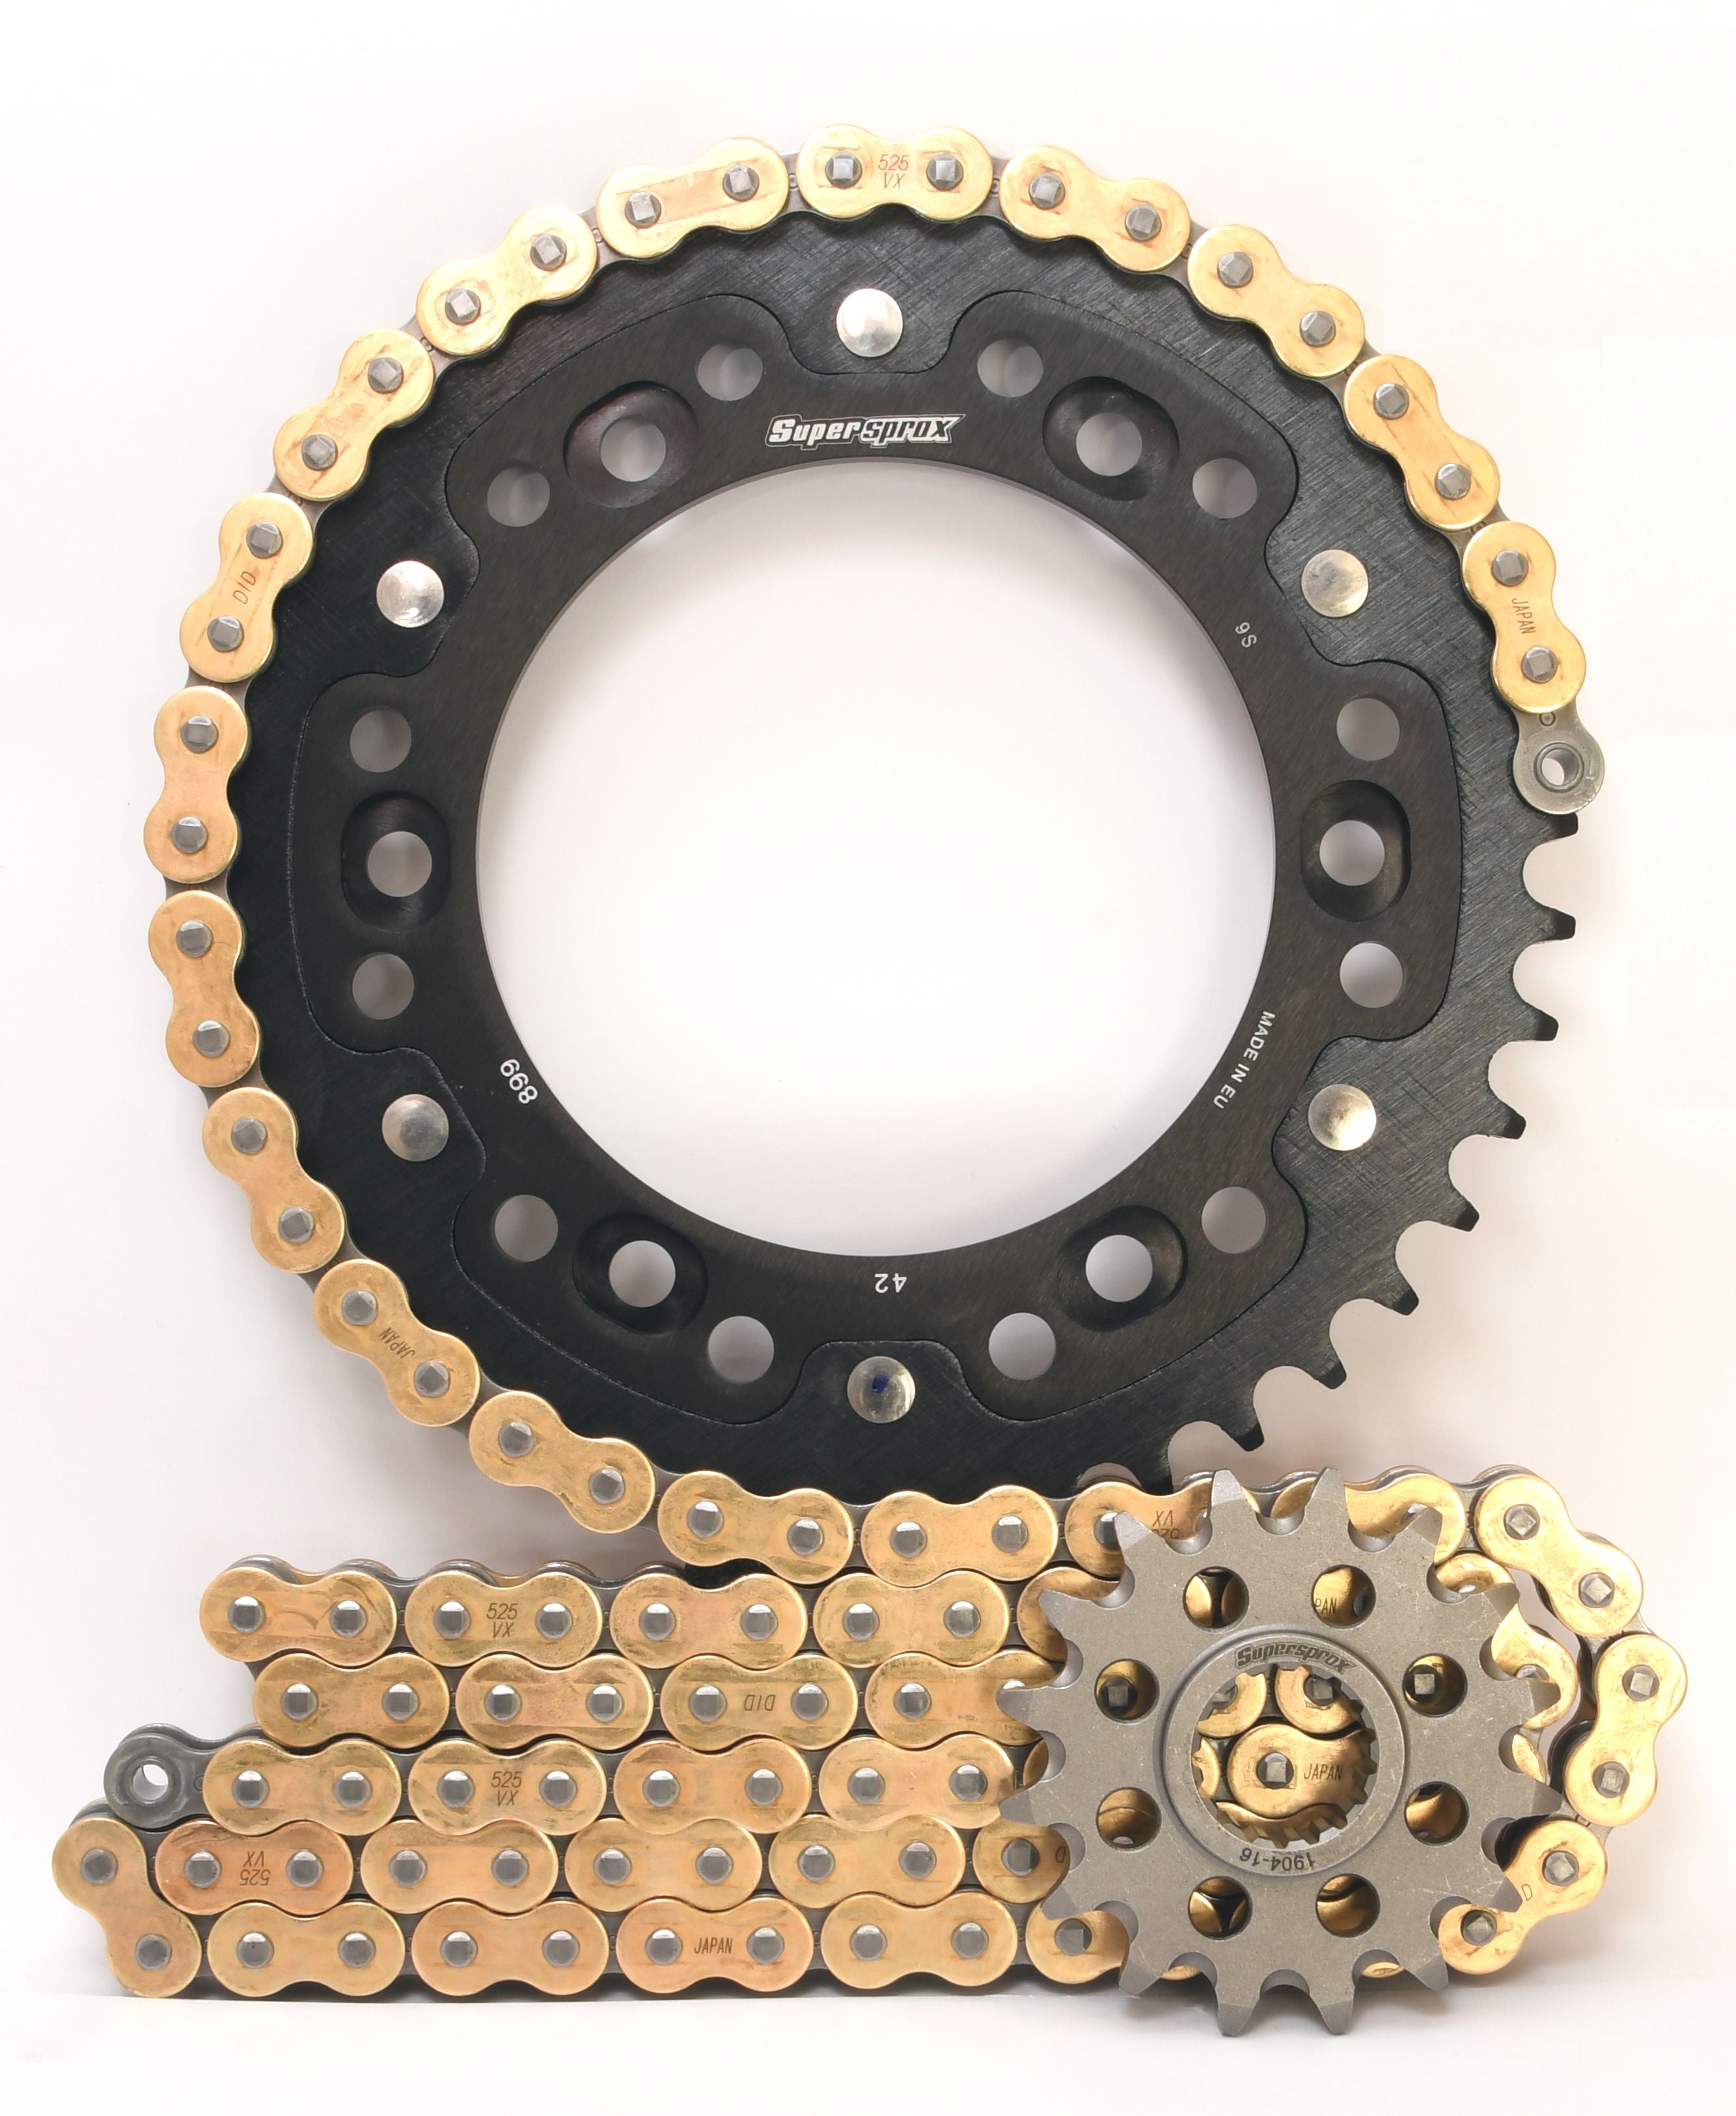 Supersprox Chain & Sprocket Kit for KTM Adventure - Choose Your Gearing